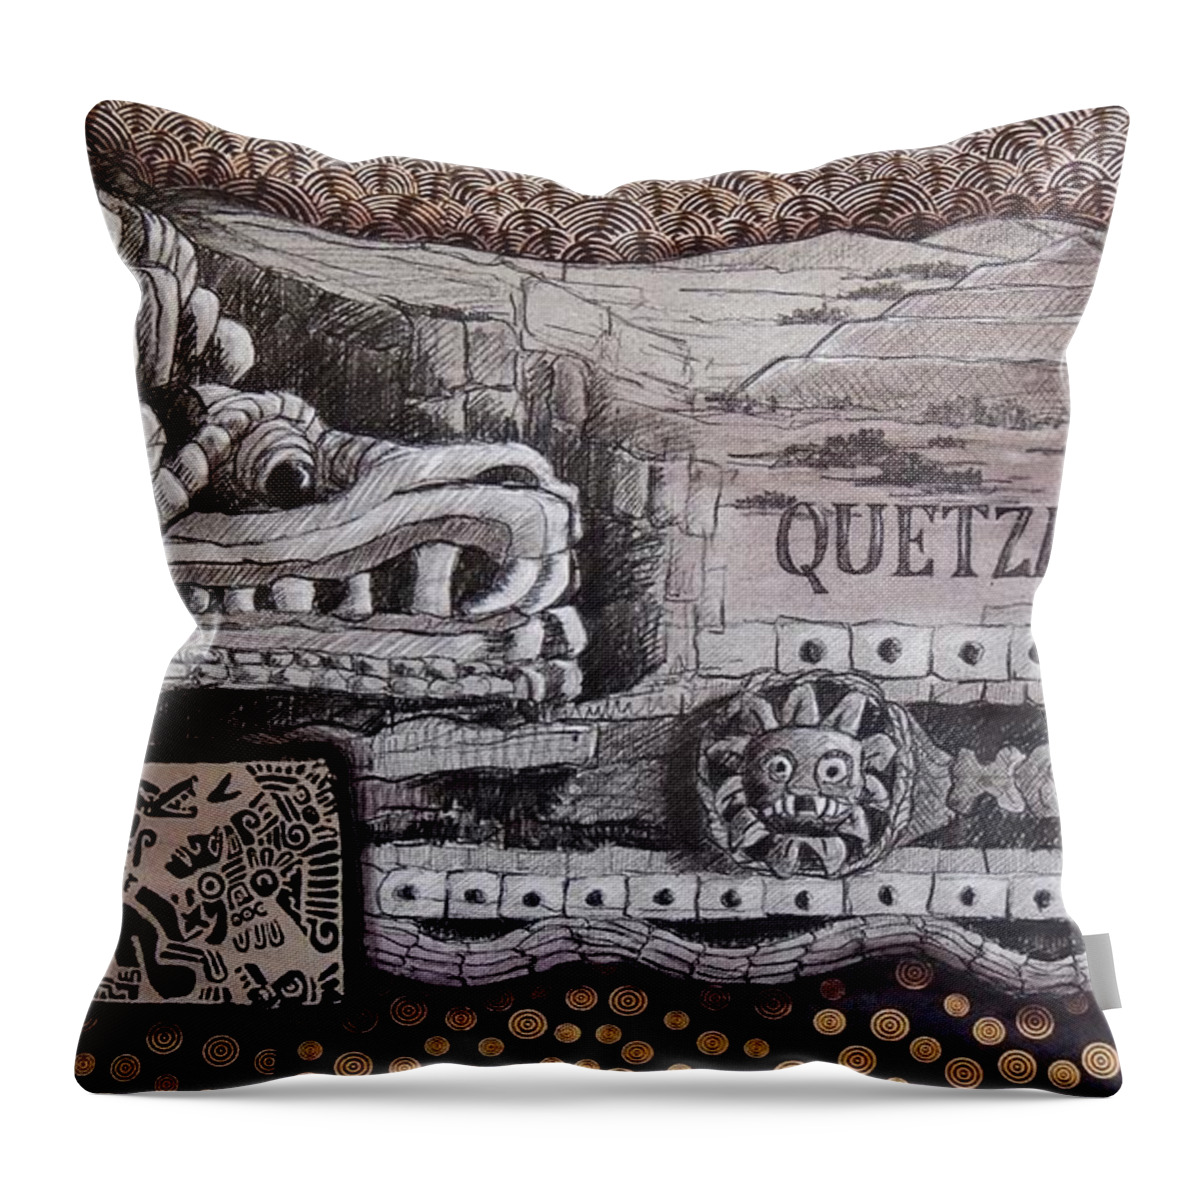 Mexico Throw Pillow featuring the mixed media Quetzalcoatl by Candy Mayer